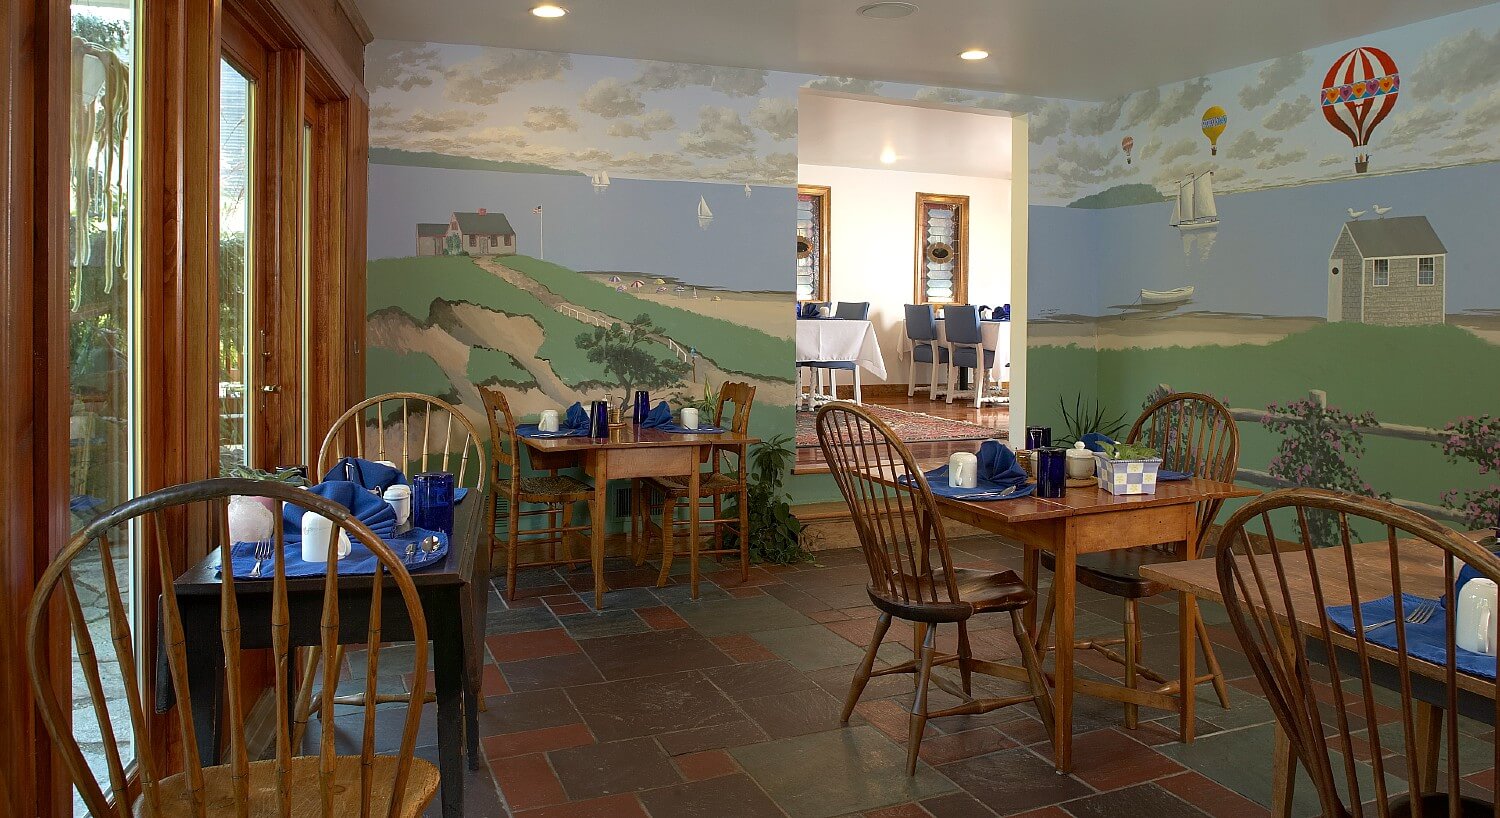 Dining area with murals on the walls, large windows, and four tables of two set for breakfast